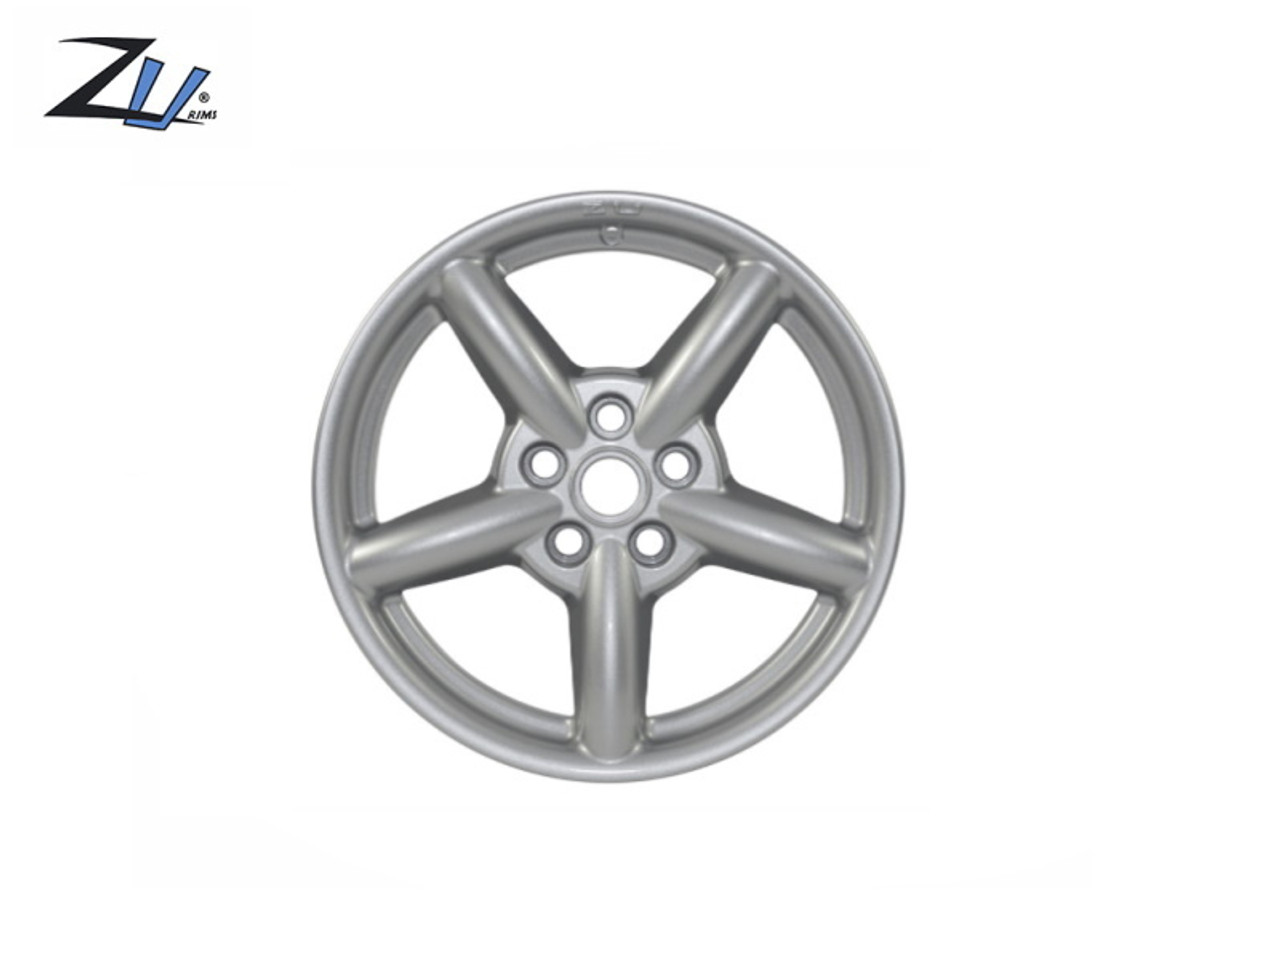 Zu Alloy Wheel Finished In High Power Silver 18 x 8 With Adapter Ring - DA2461